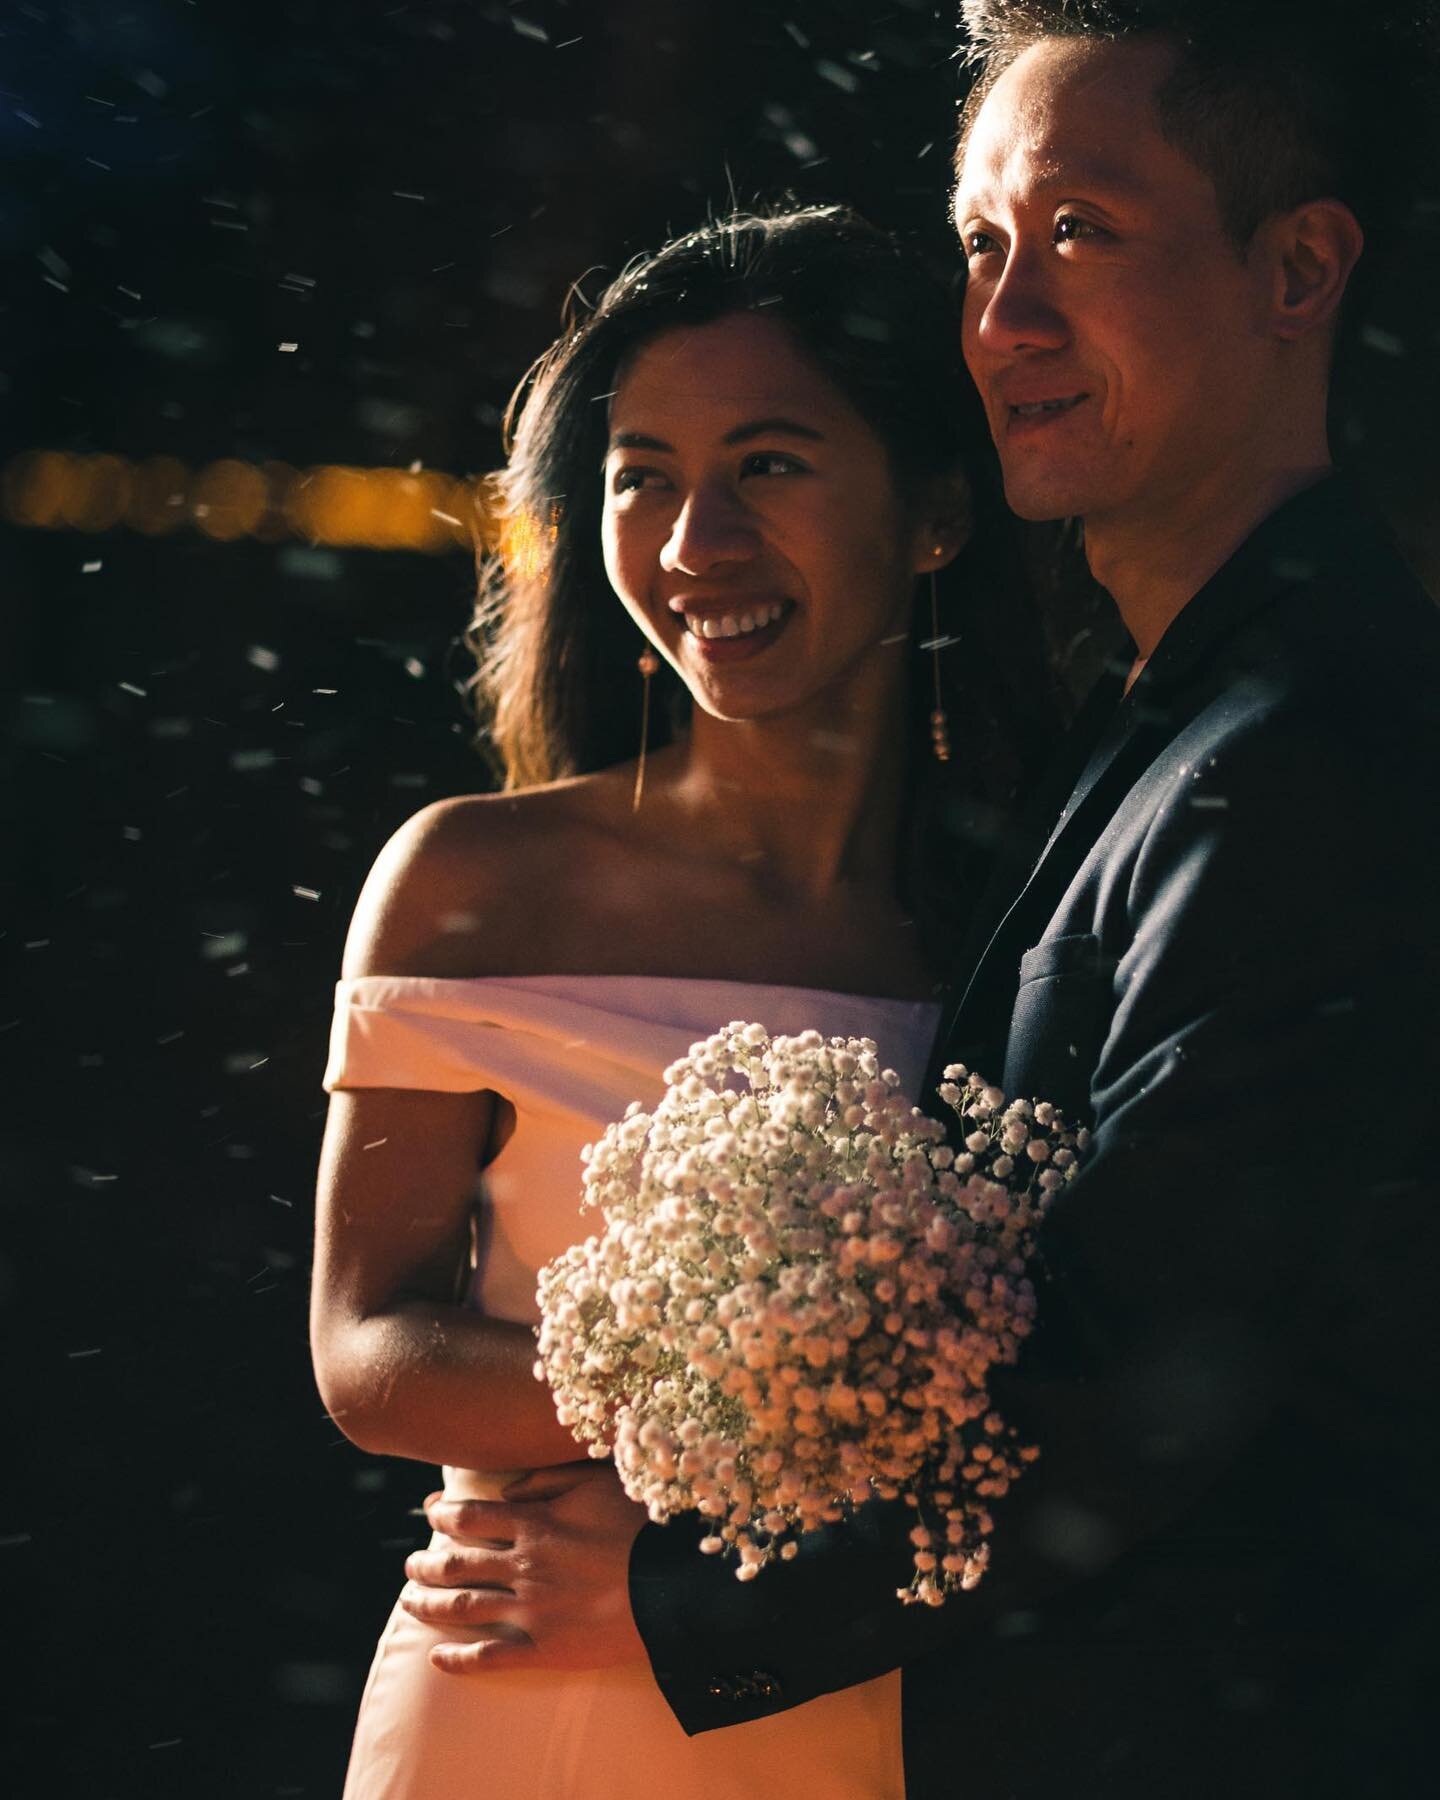 Unforgettable winter wedding is an ideal choice for the bold brides and grooms who don't let cold weather get in the way of celebrating their love. 

Contact us to plan your romantic proposal, elopement or vow-renewal ceremony in Lapland. Let's creat